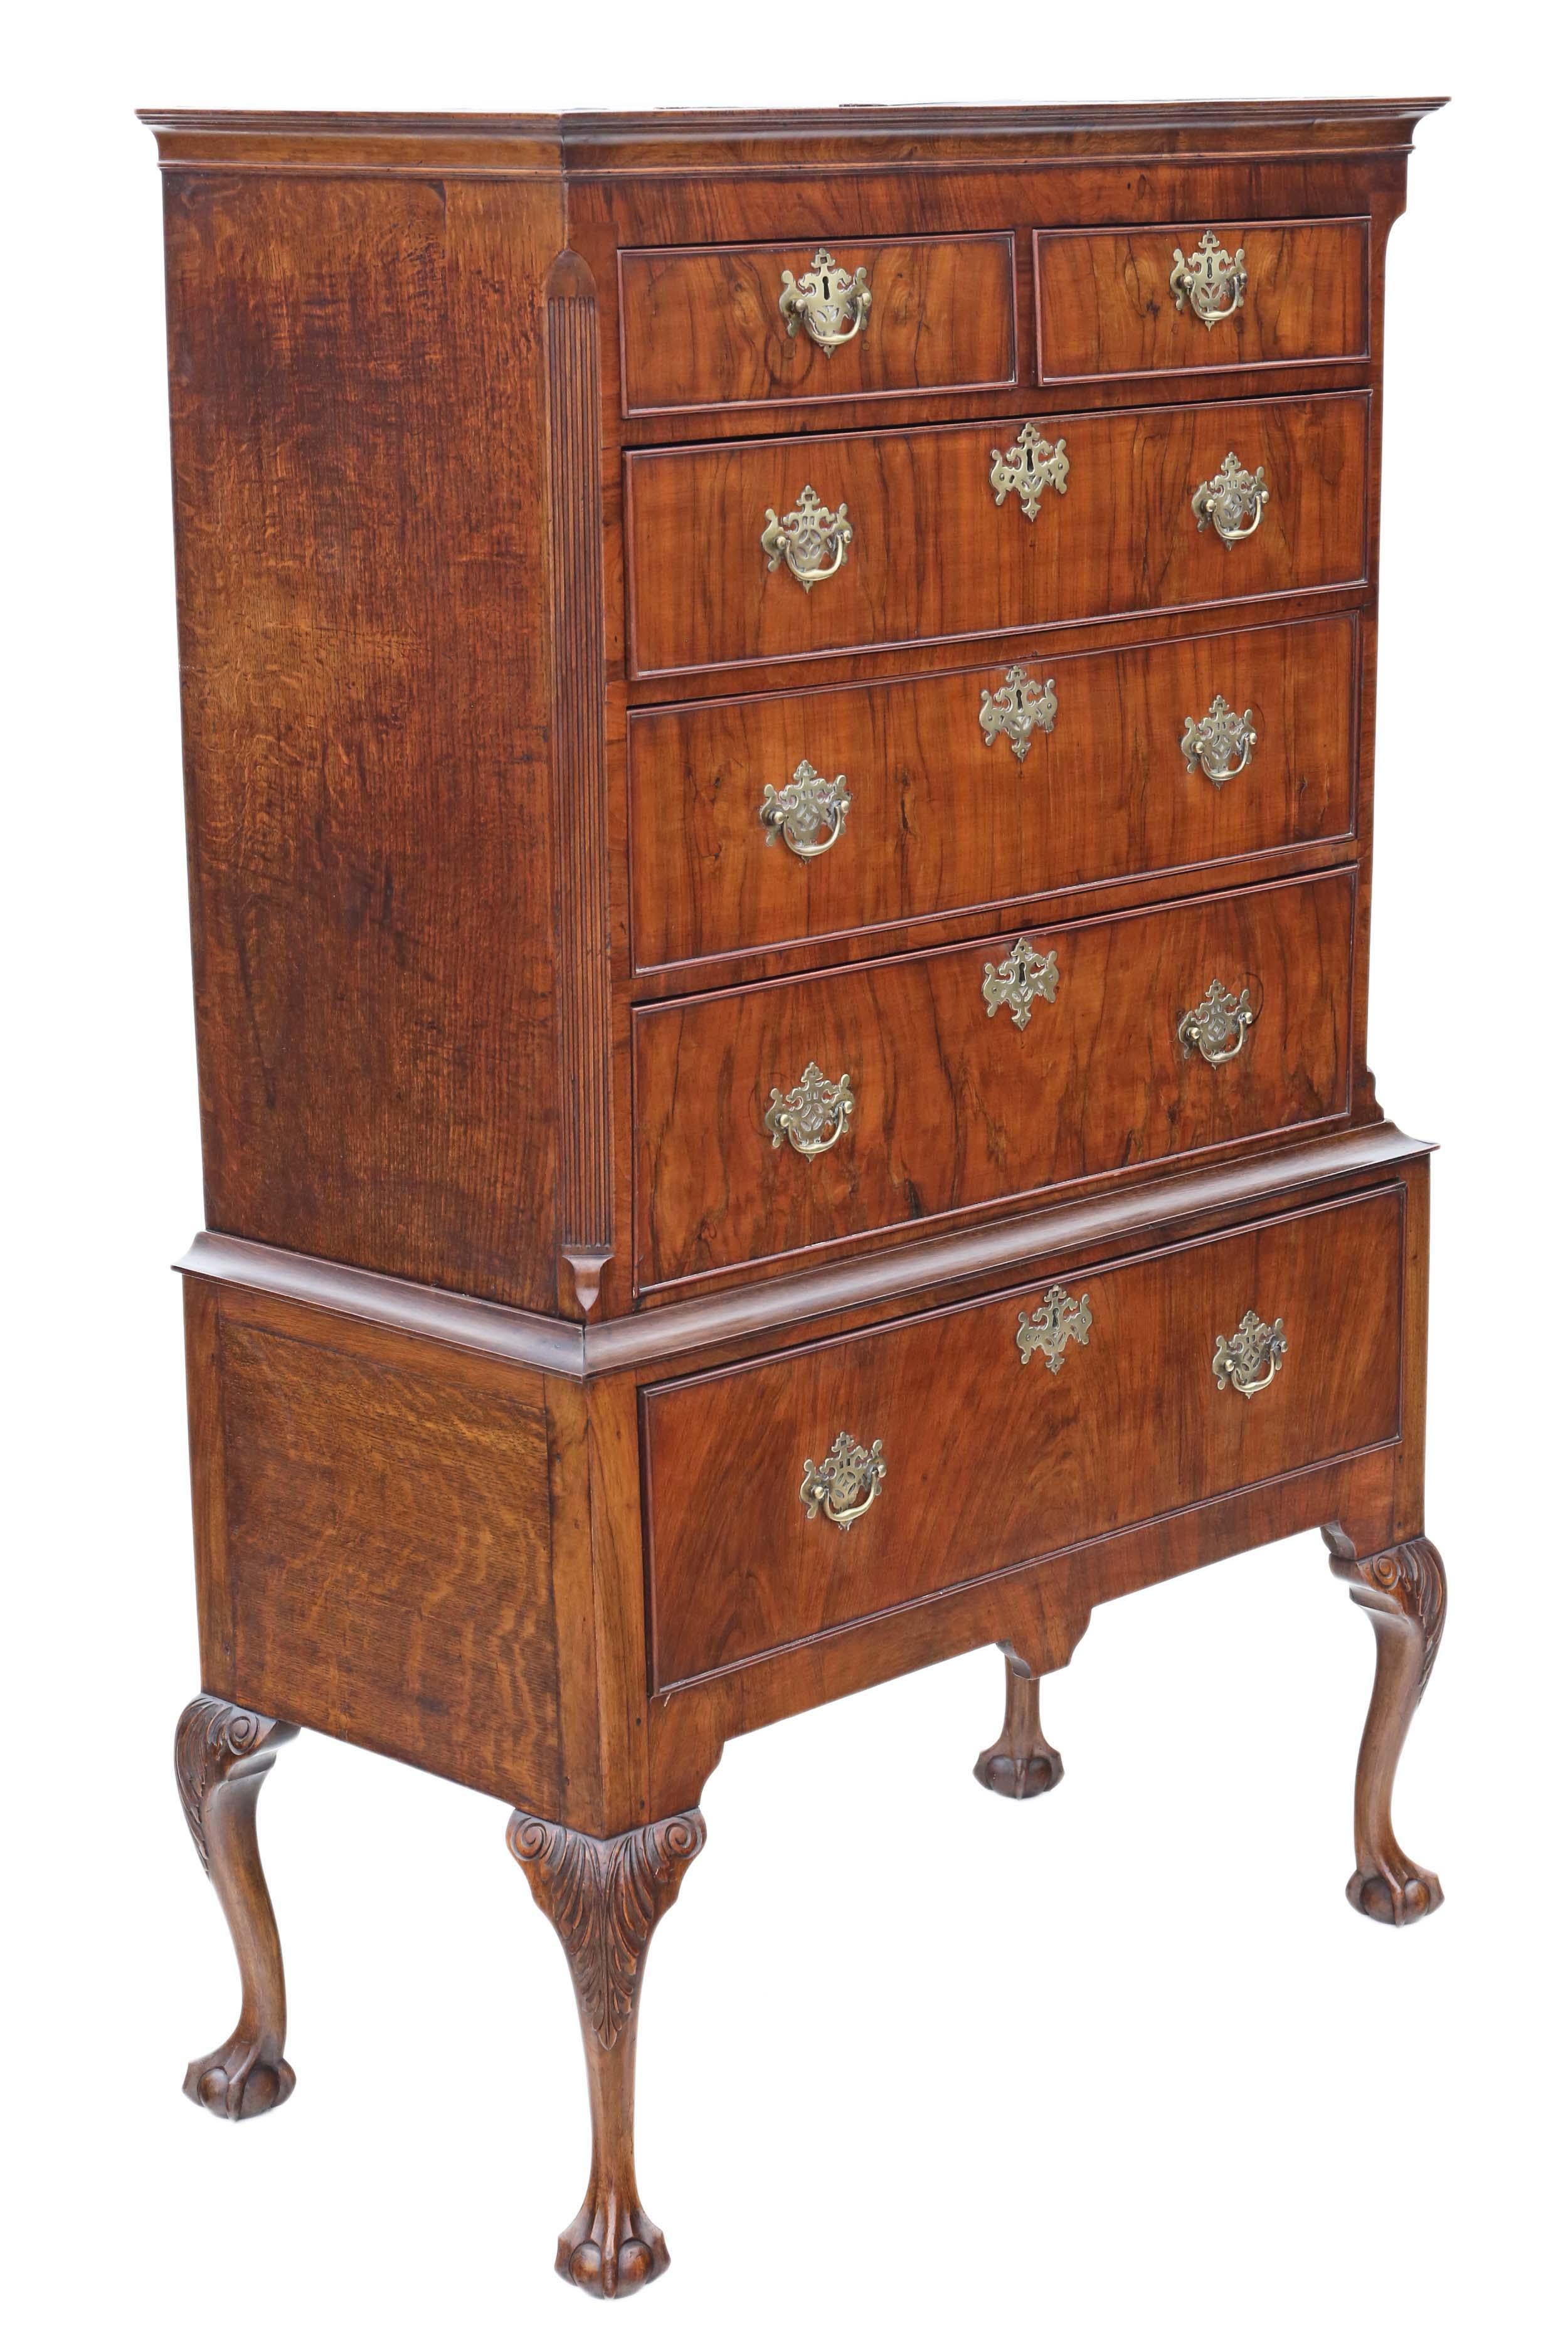 Antique Georgian Figured Walnut Chest of Drawers on Stand from the 18th Century For Sale 3